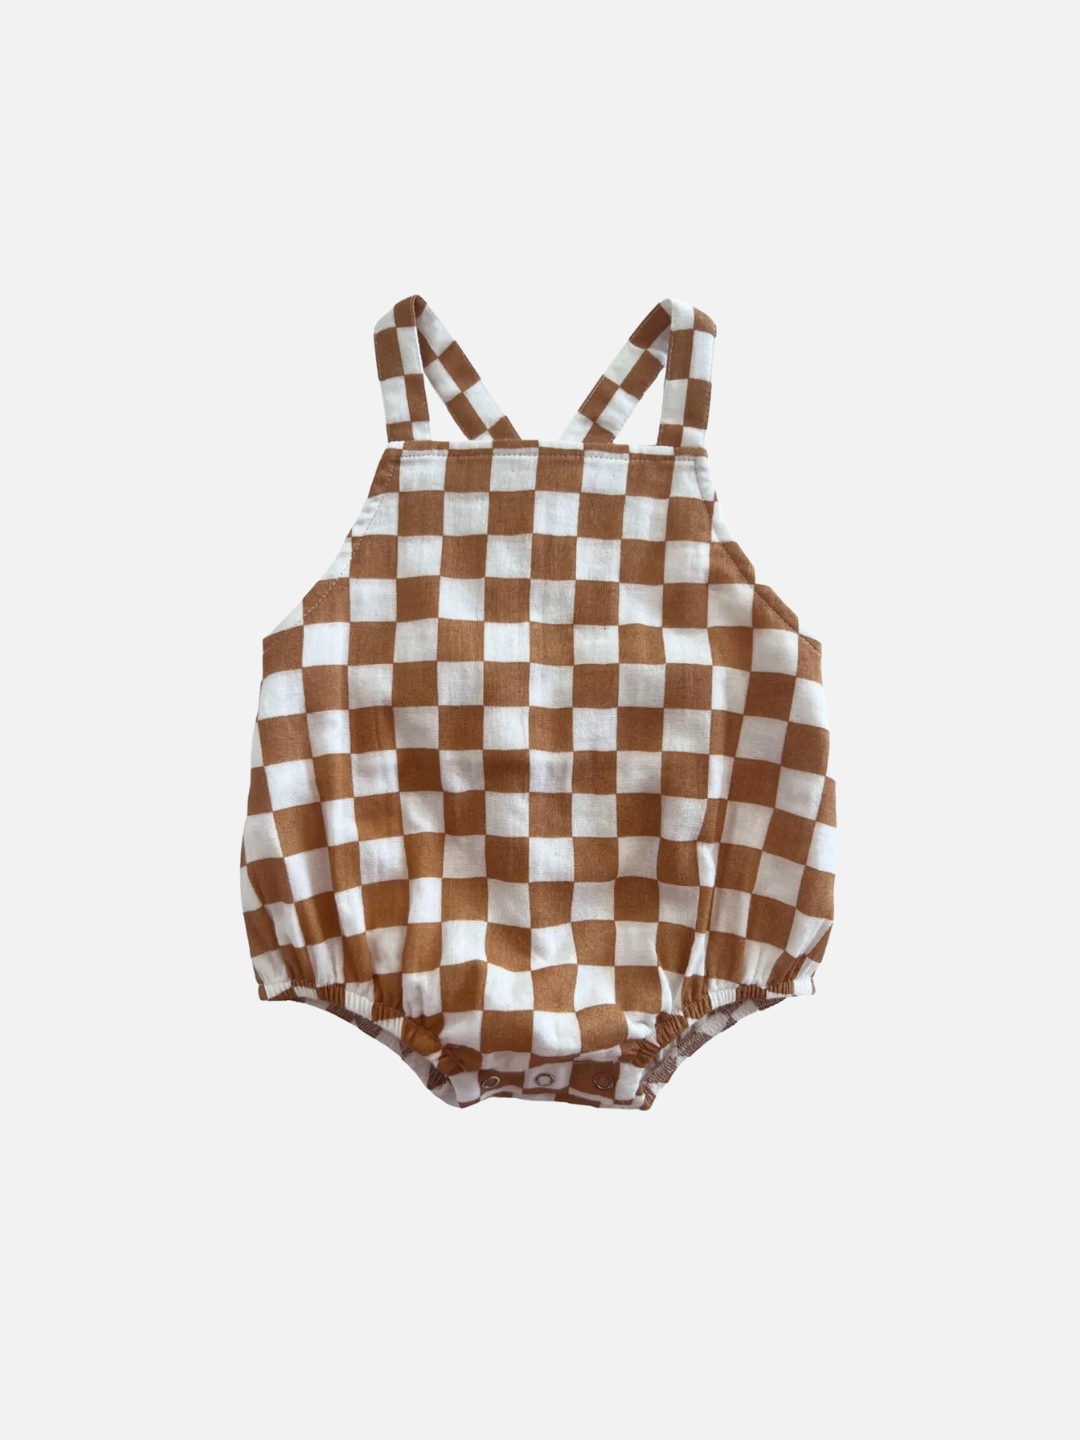 A brown and white checkerboard kids' sunsuit, front view